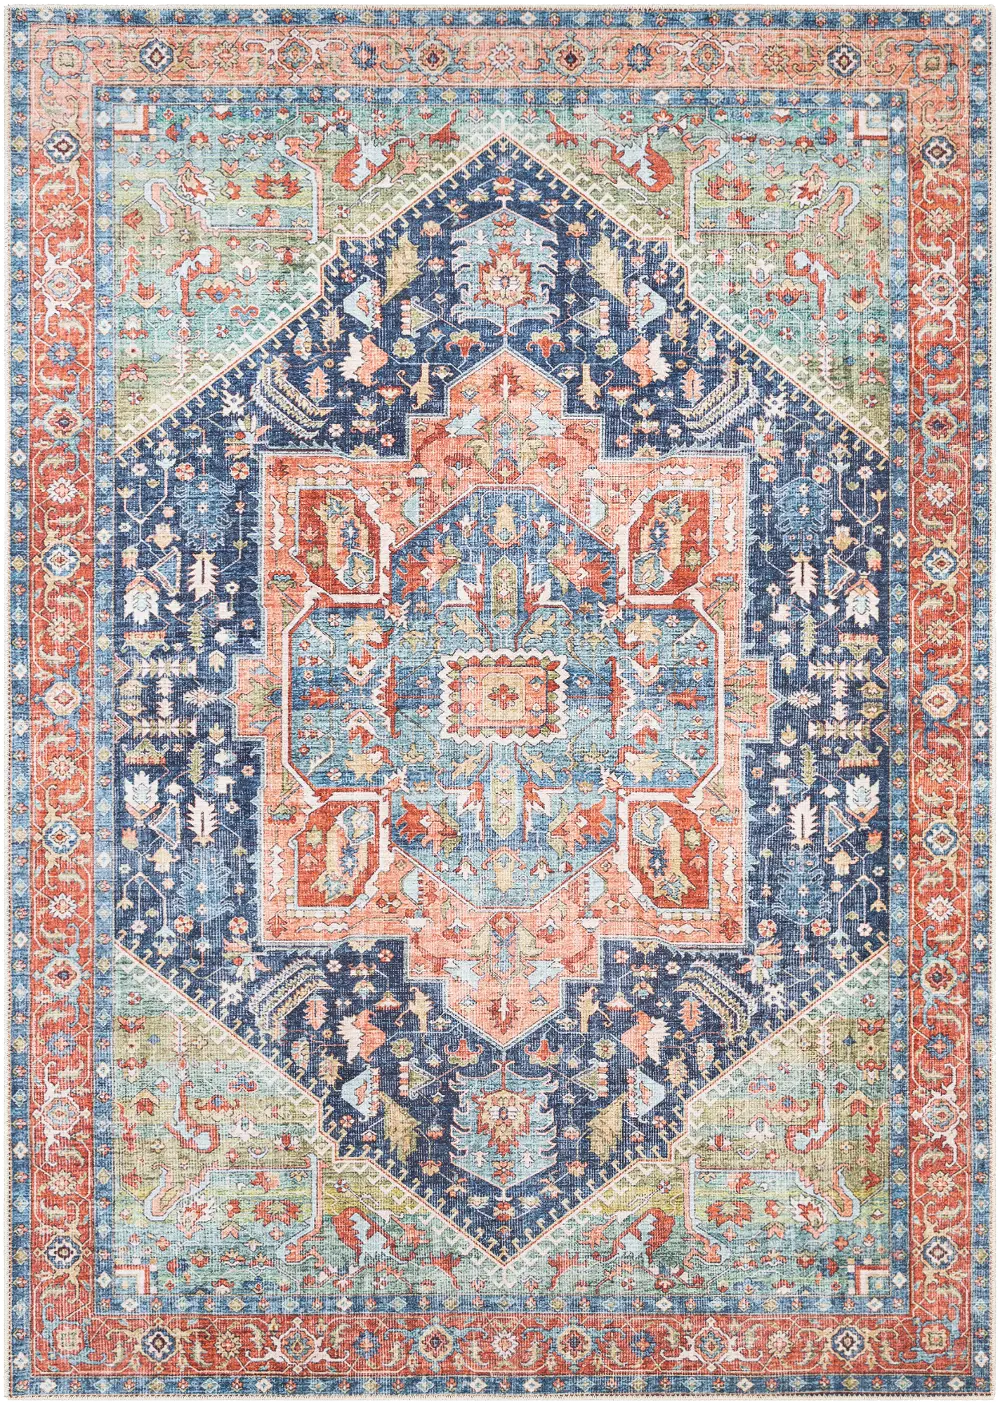 5 x 7 Medium Traditional Teal and Blush Area Rug - Amelie-1